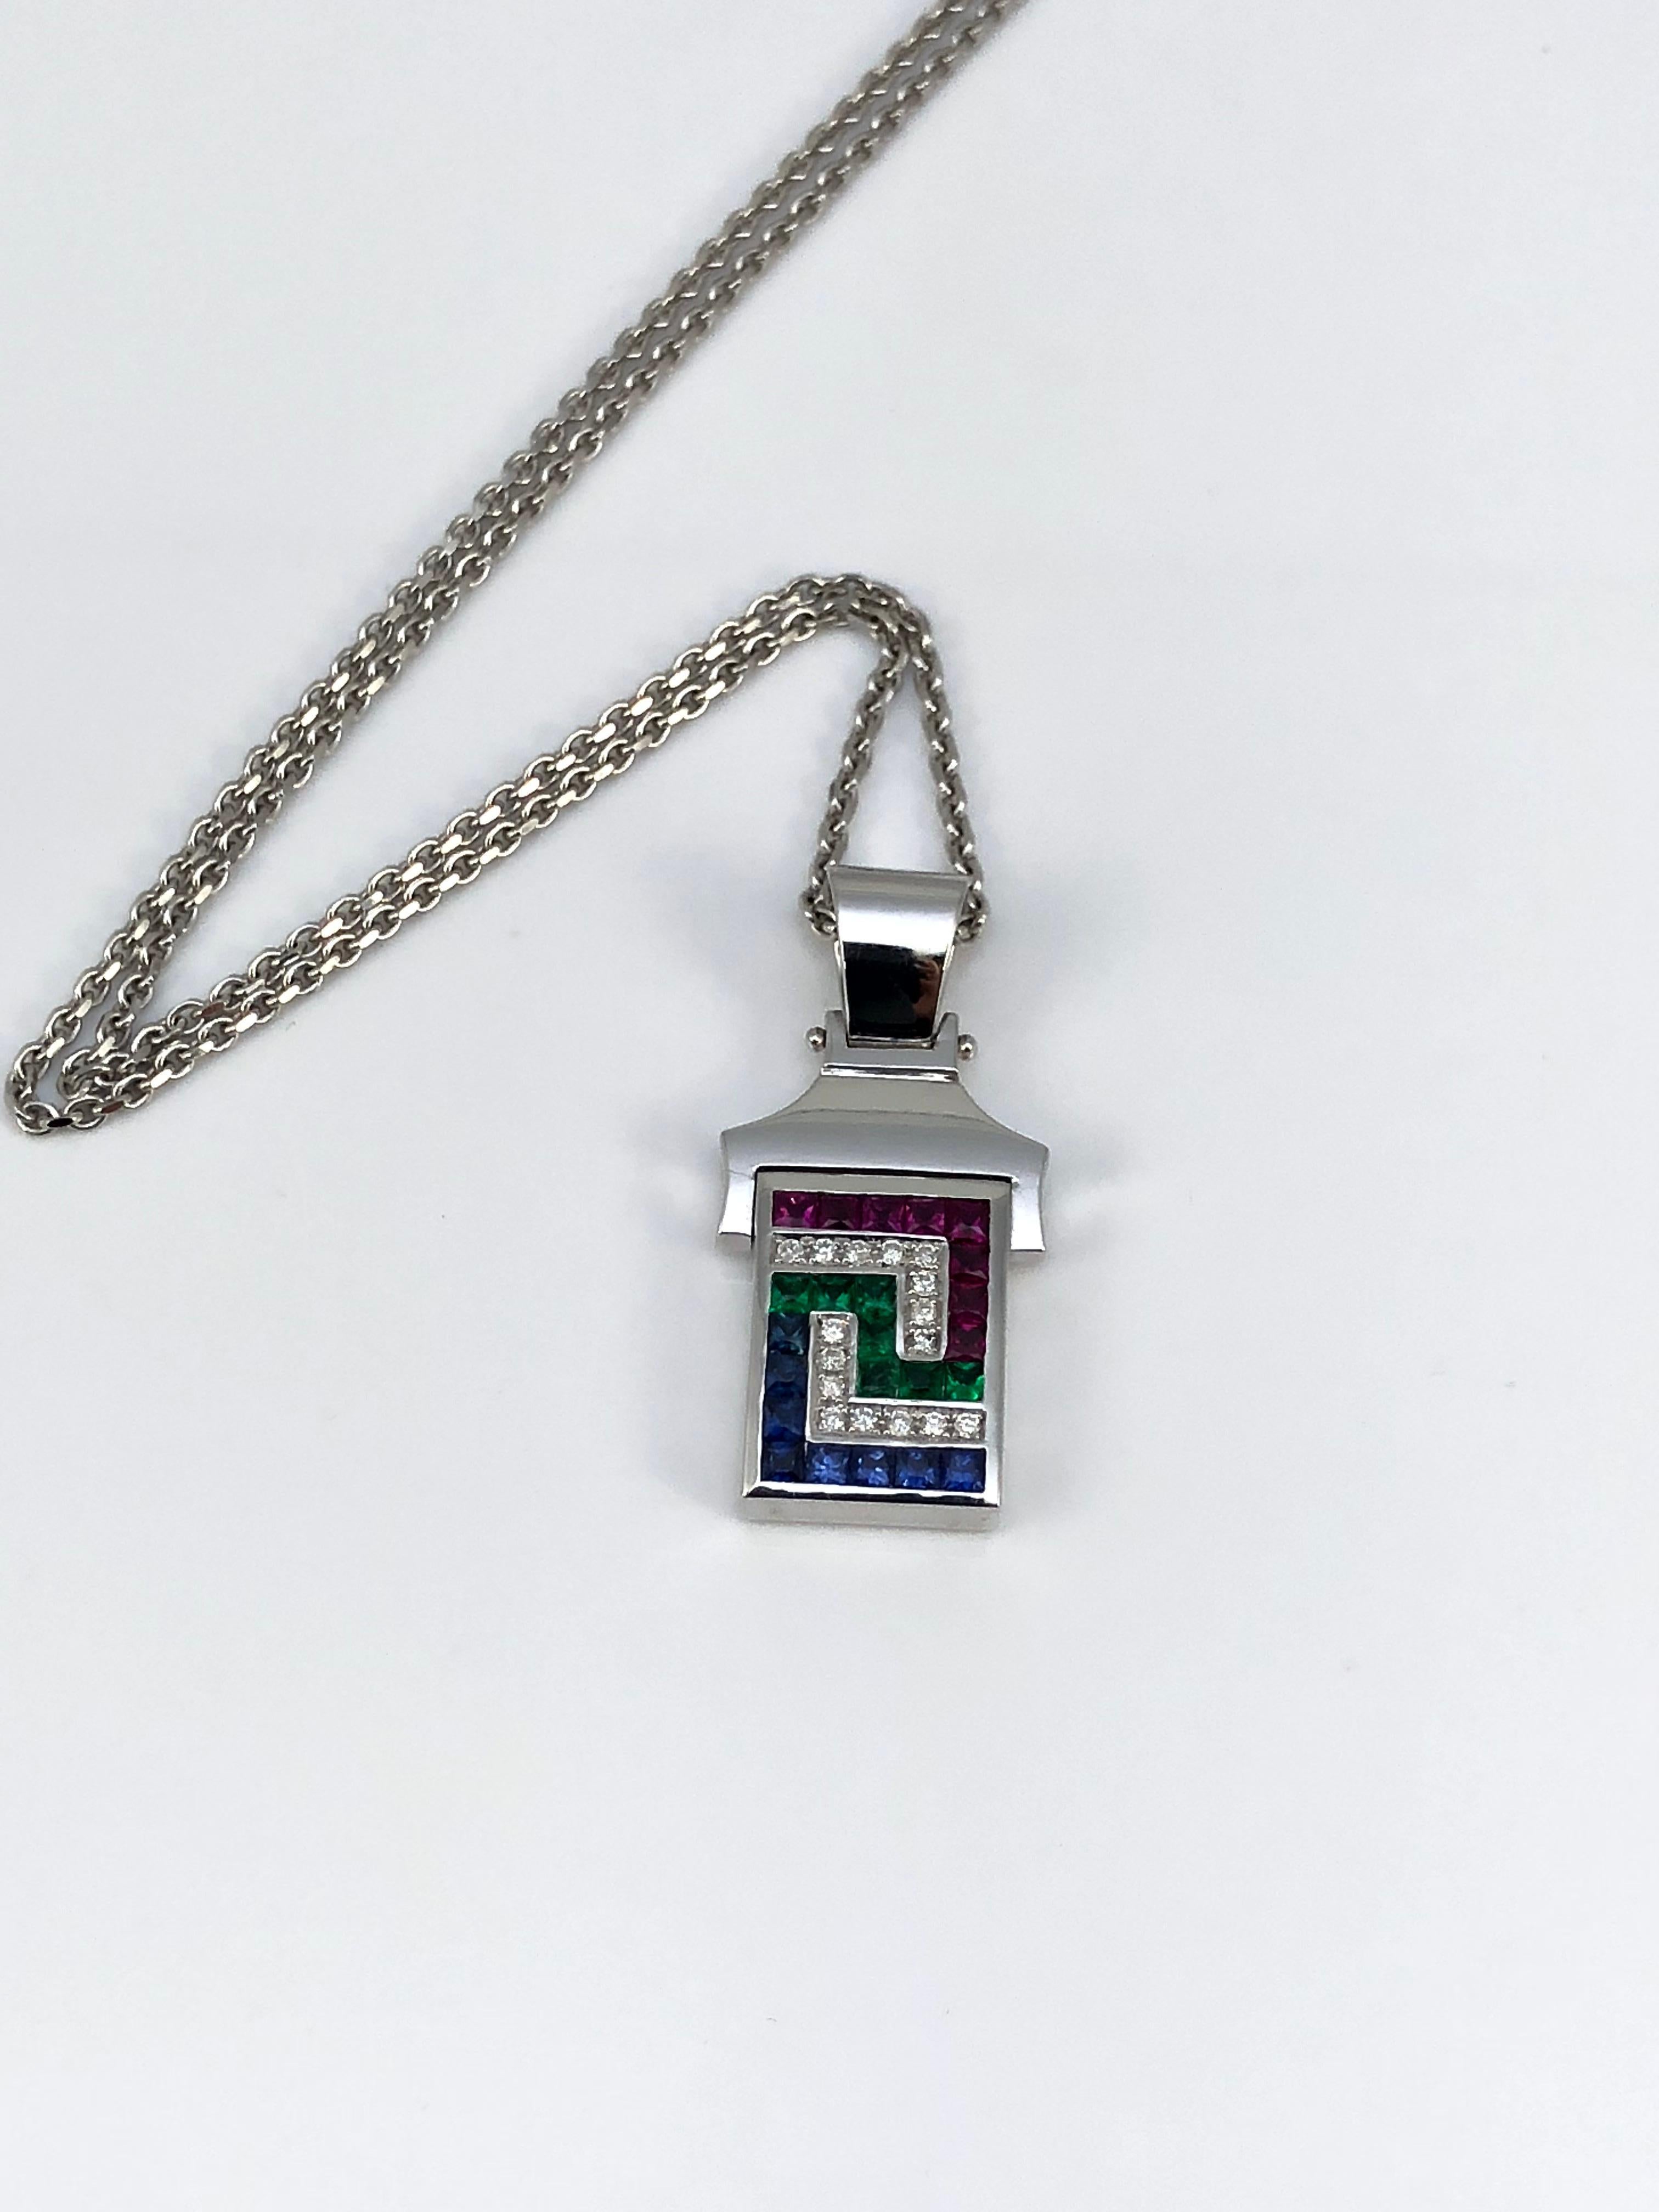 S.Georgios designer 18 Karat White Gold Pendant Necklace with Diamonds, Rubies, Sapphires, and Emeralds shaping the Greek Key design, which symbolizes eternity. The beautiful Pendant features Brilliant Cut White Diamonds total weight of 0.13 Carat,